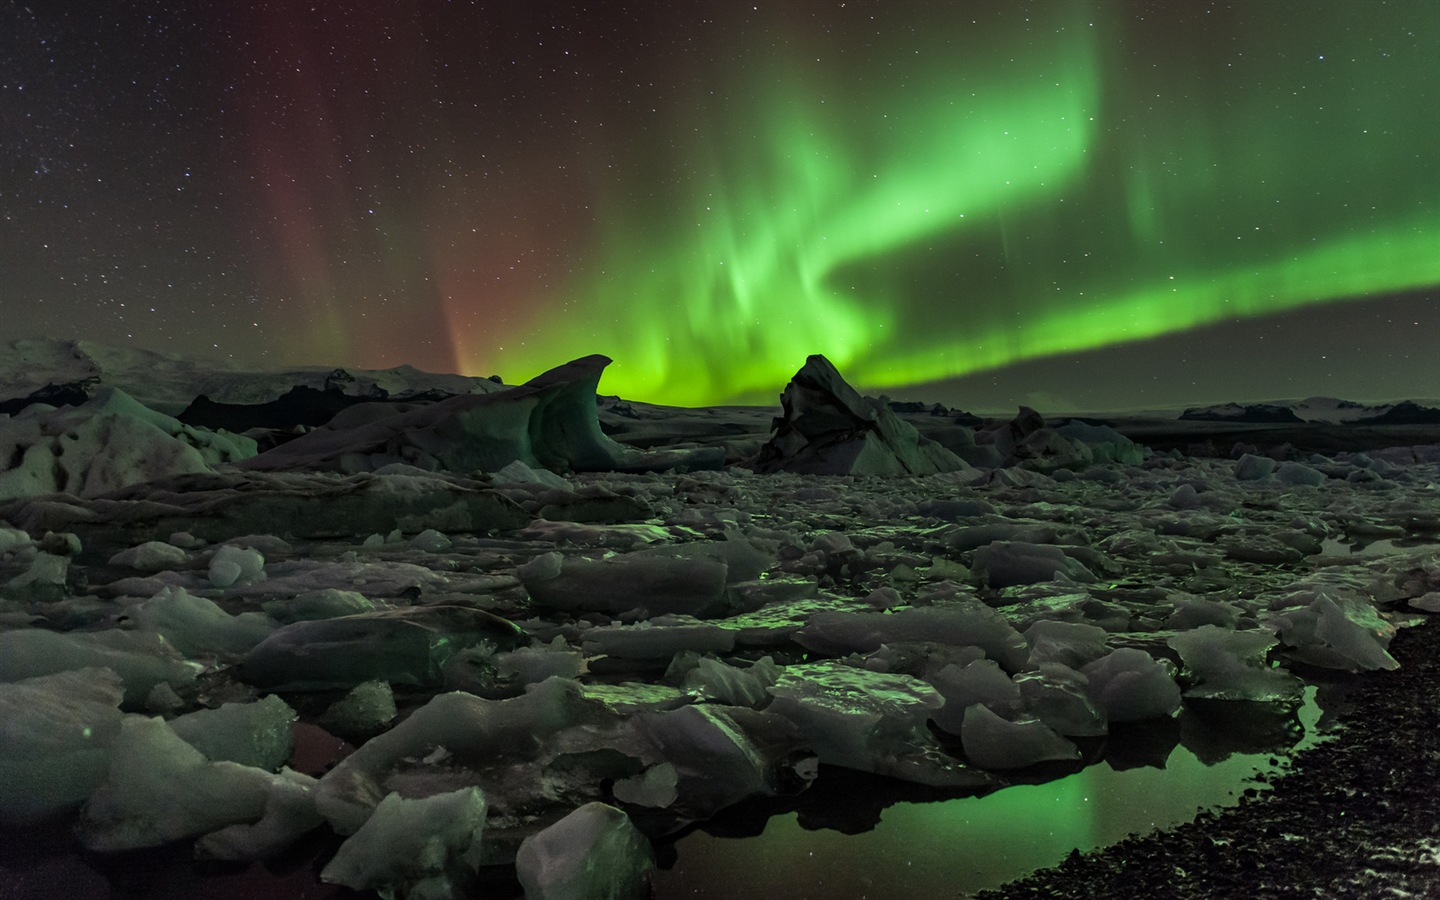 Natural wonders of the Northern Lights HD Wallpaper (1) #17 - 1440x900